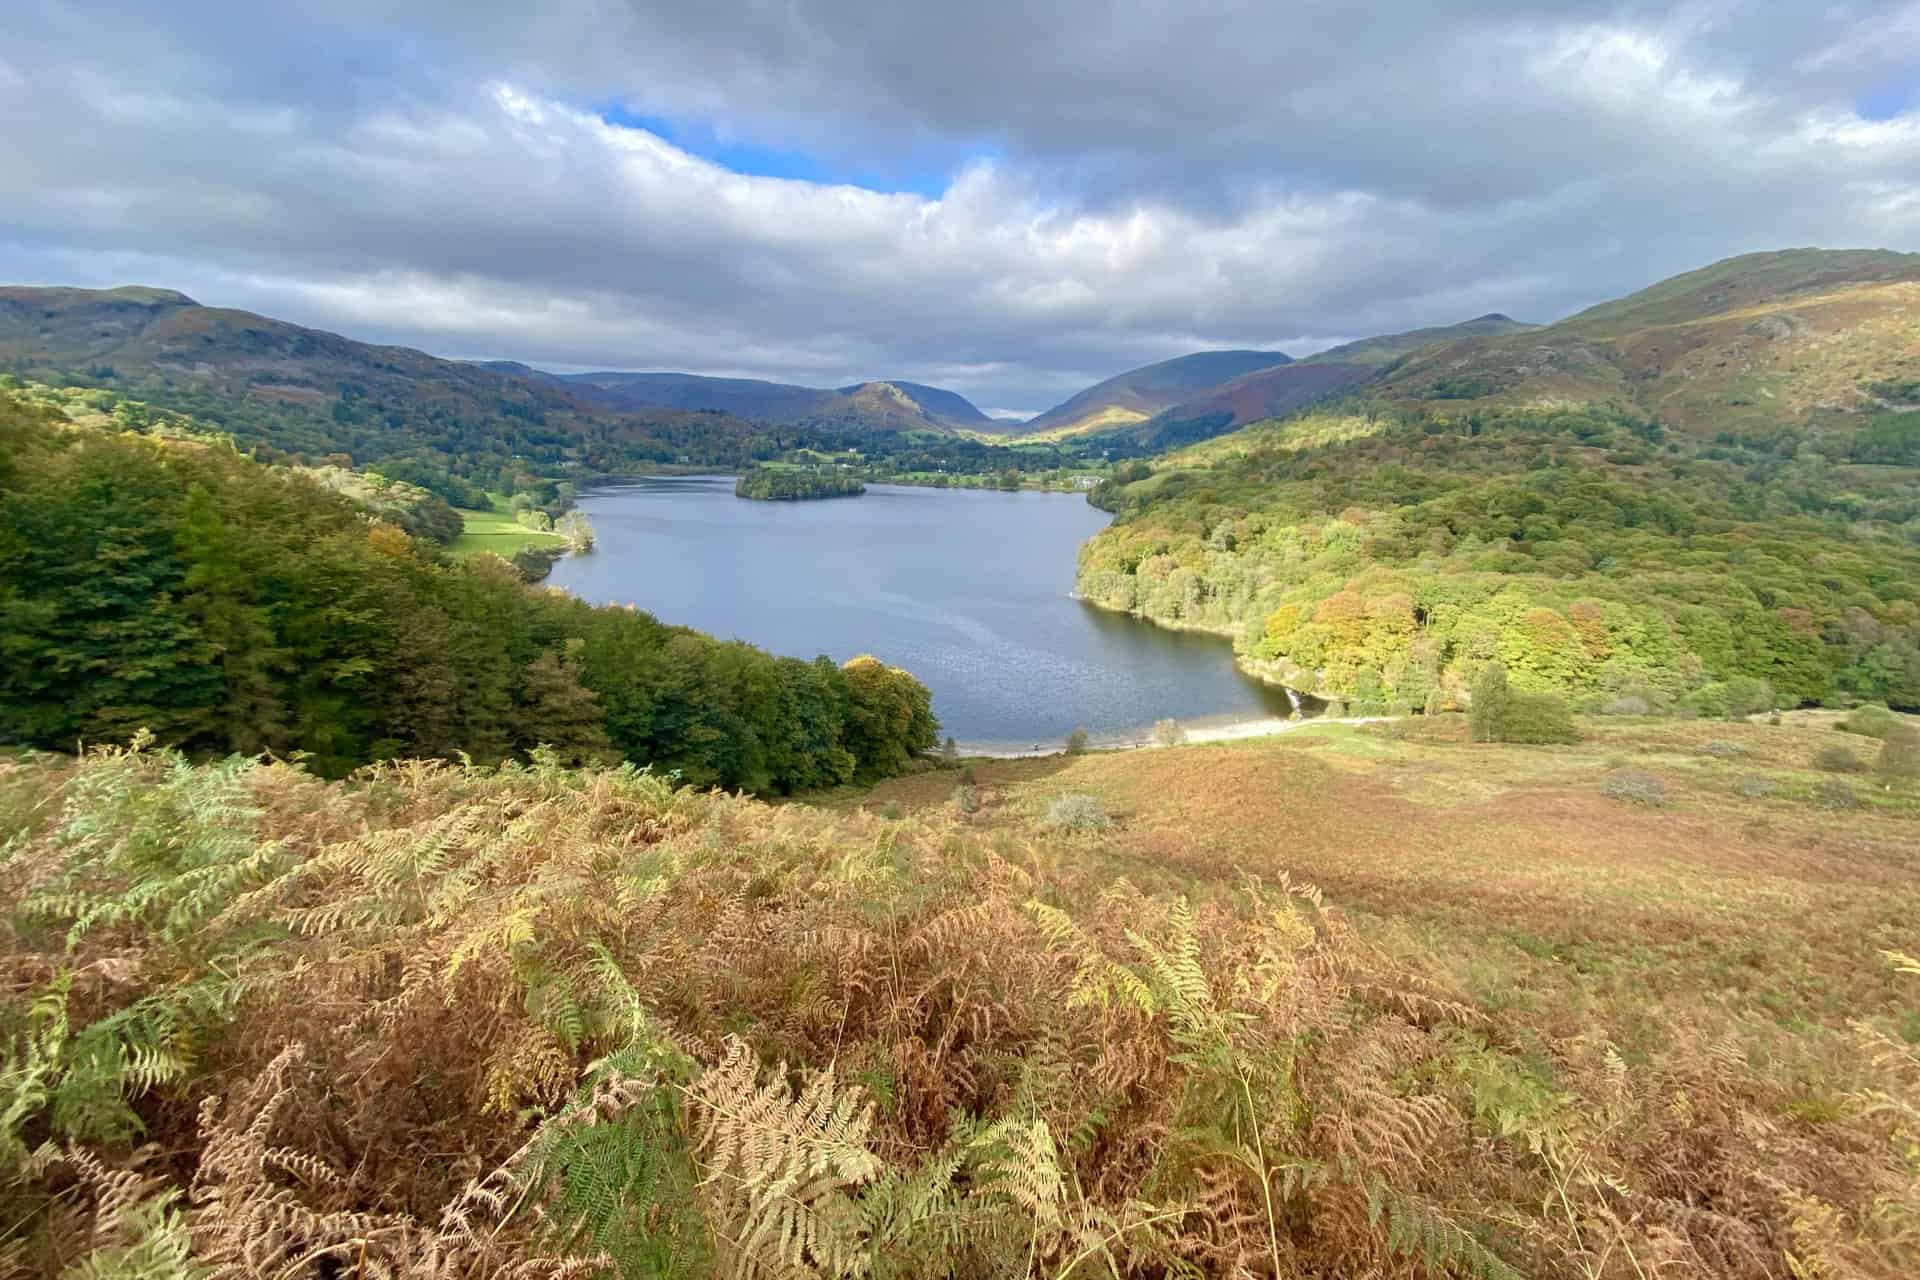 Stunning views of Grasmere and the surrounding mountains as we walk along Loughrigg Terrace.